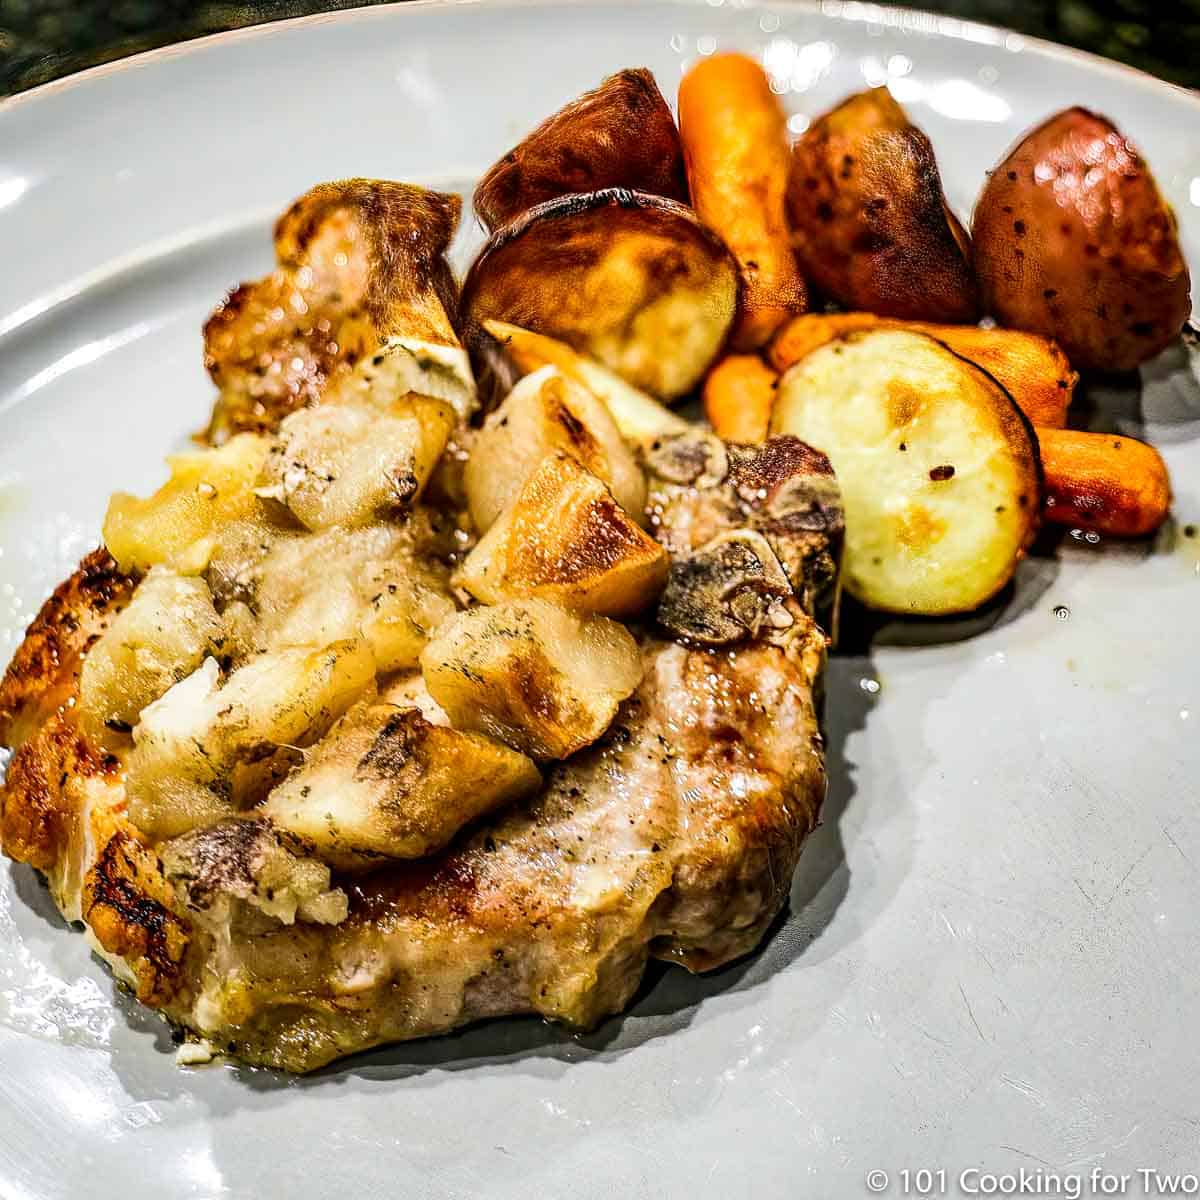 image of apple pork chops on a gray plate with carrots and potatoes